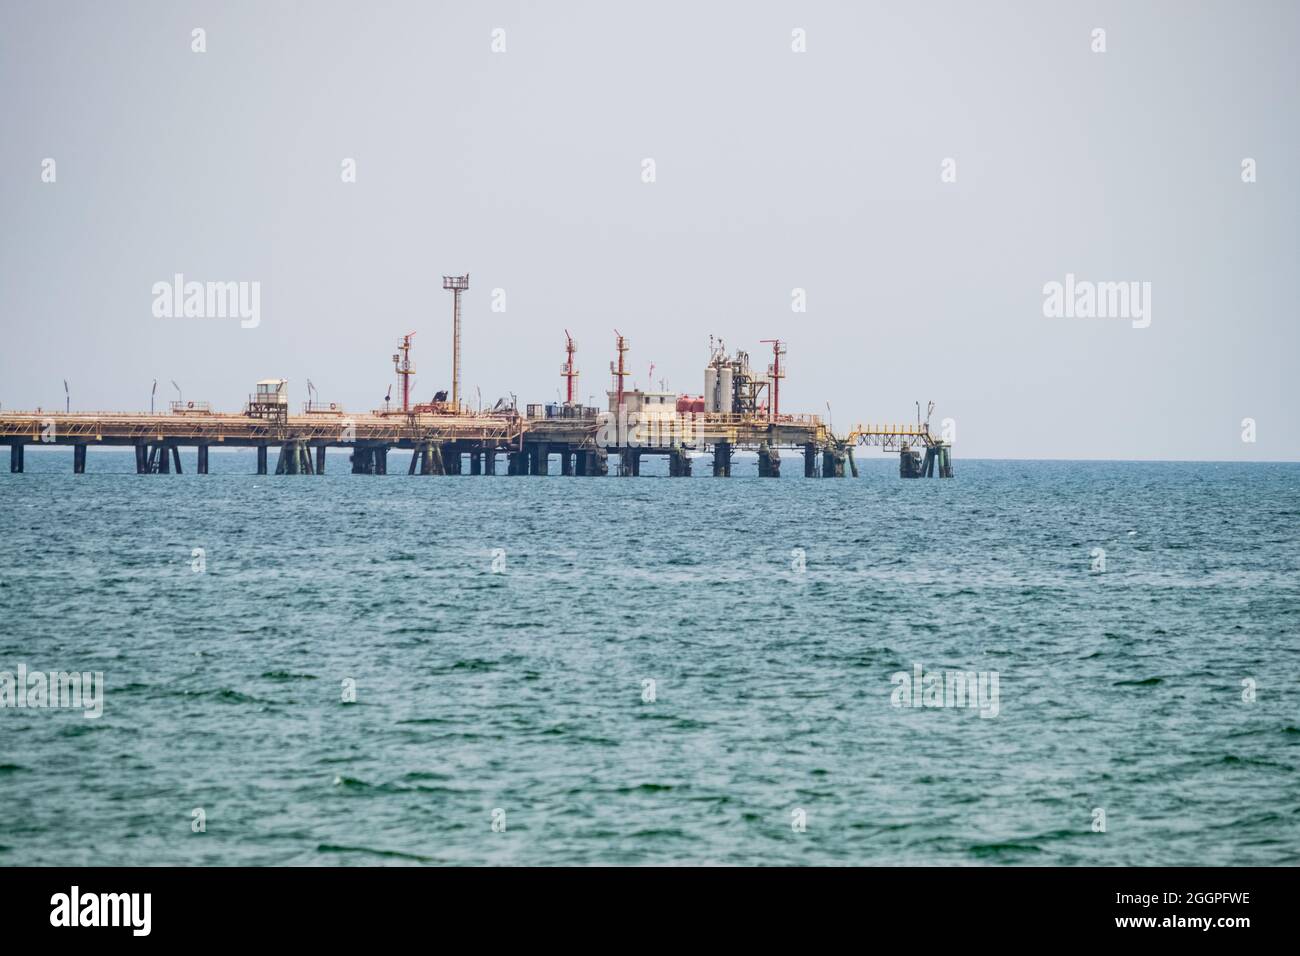 View of an oil pipeline and a dock for oil tankers. Stock Photo